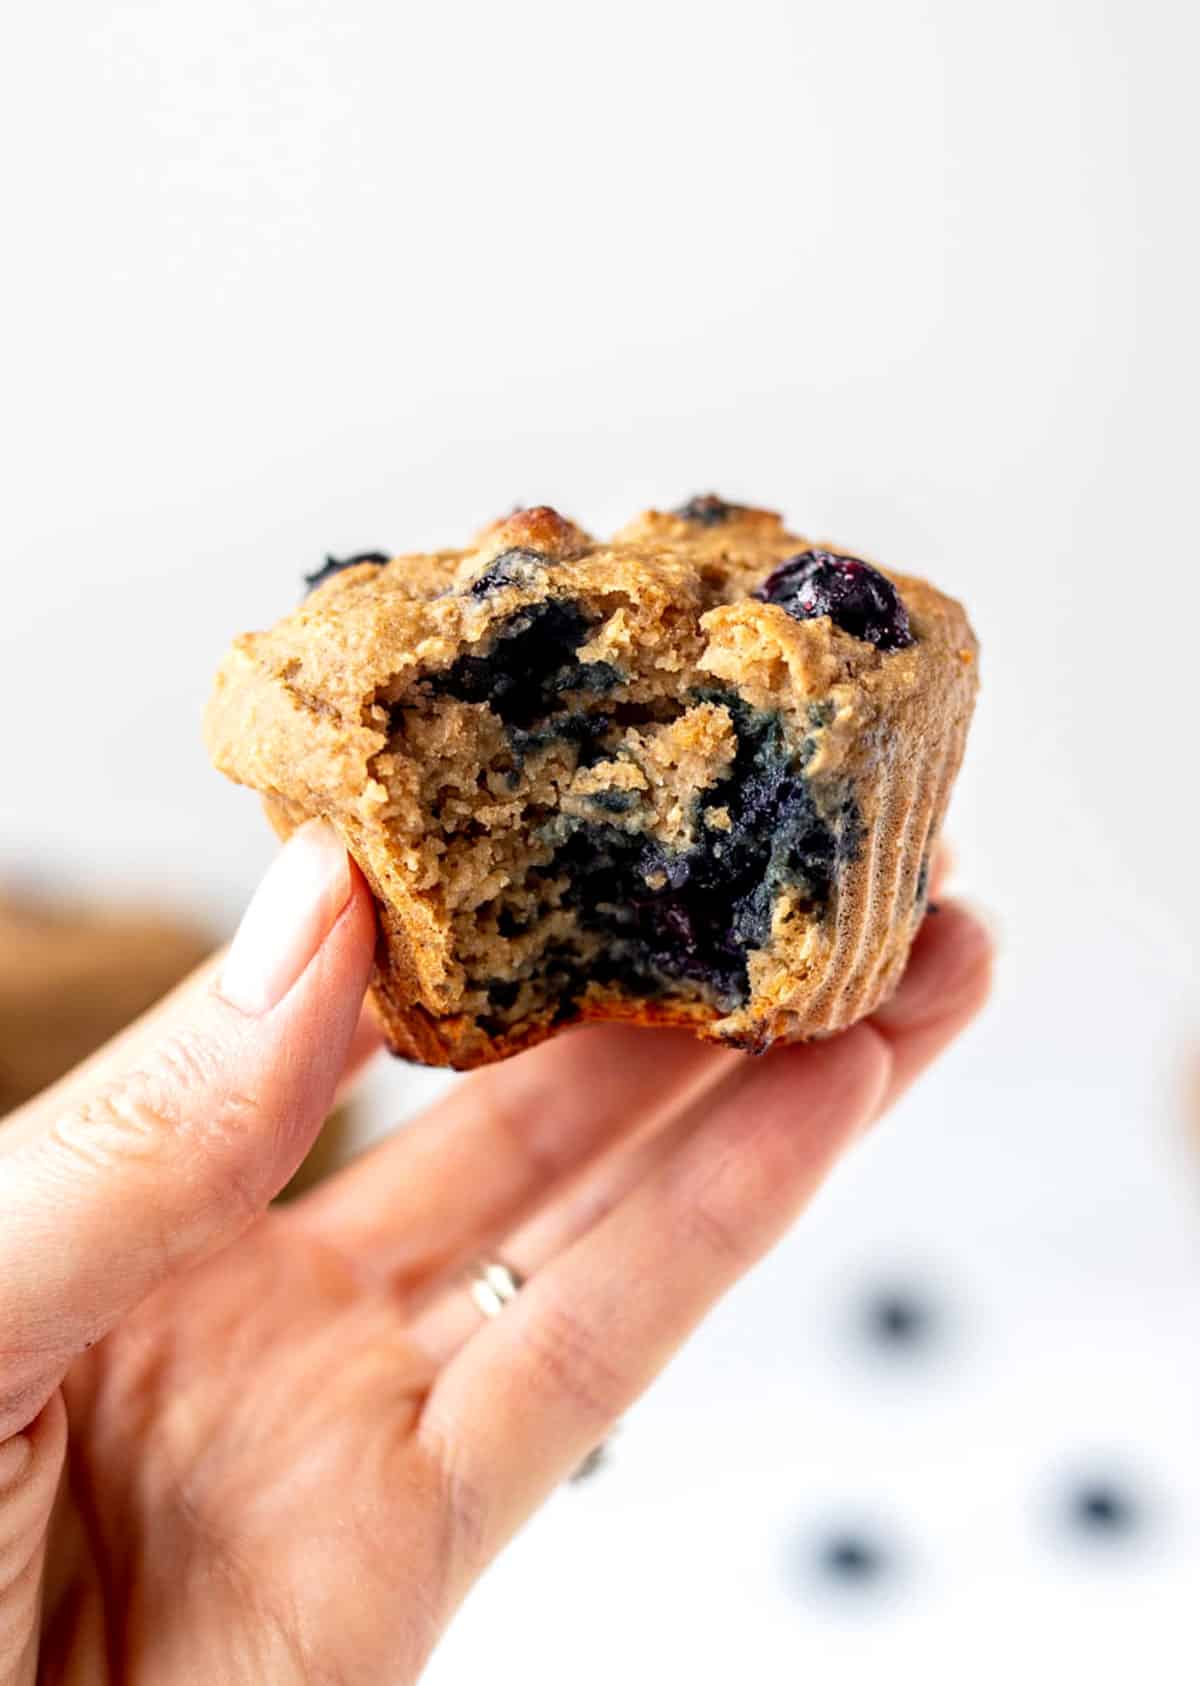 A hand holding up a blueberry protein muffin with a bite taken out of it.